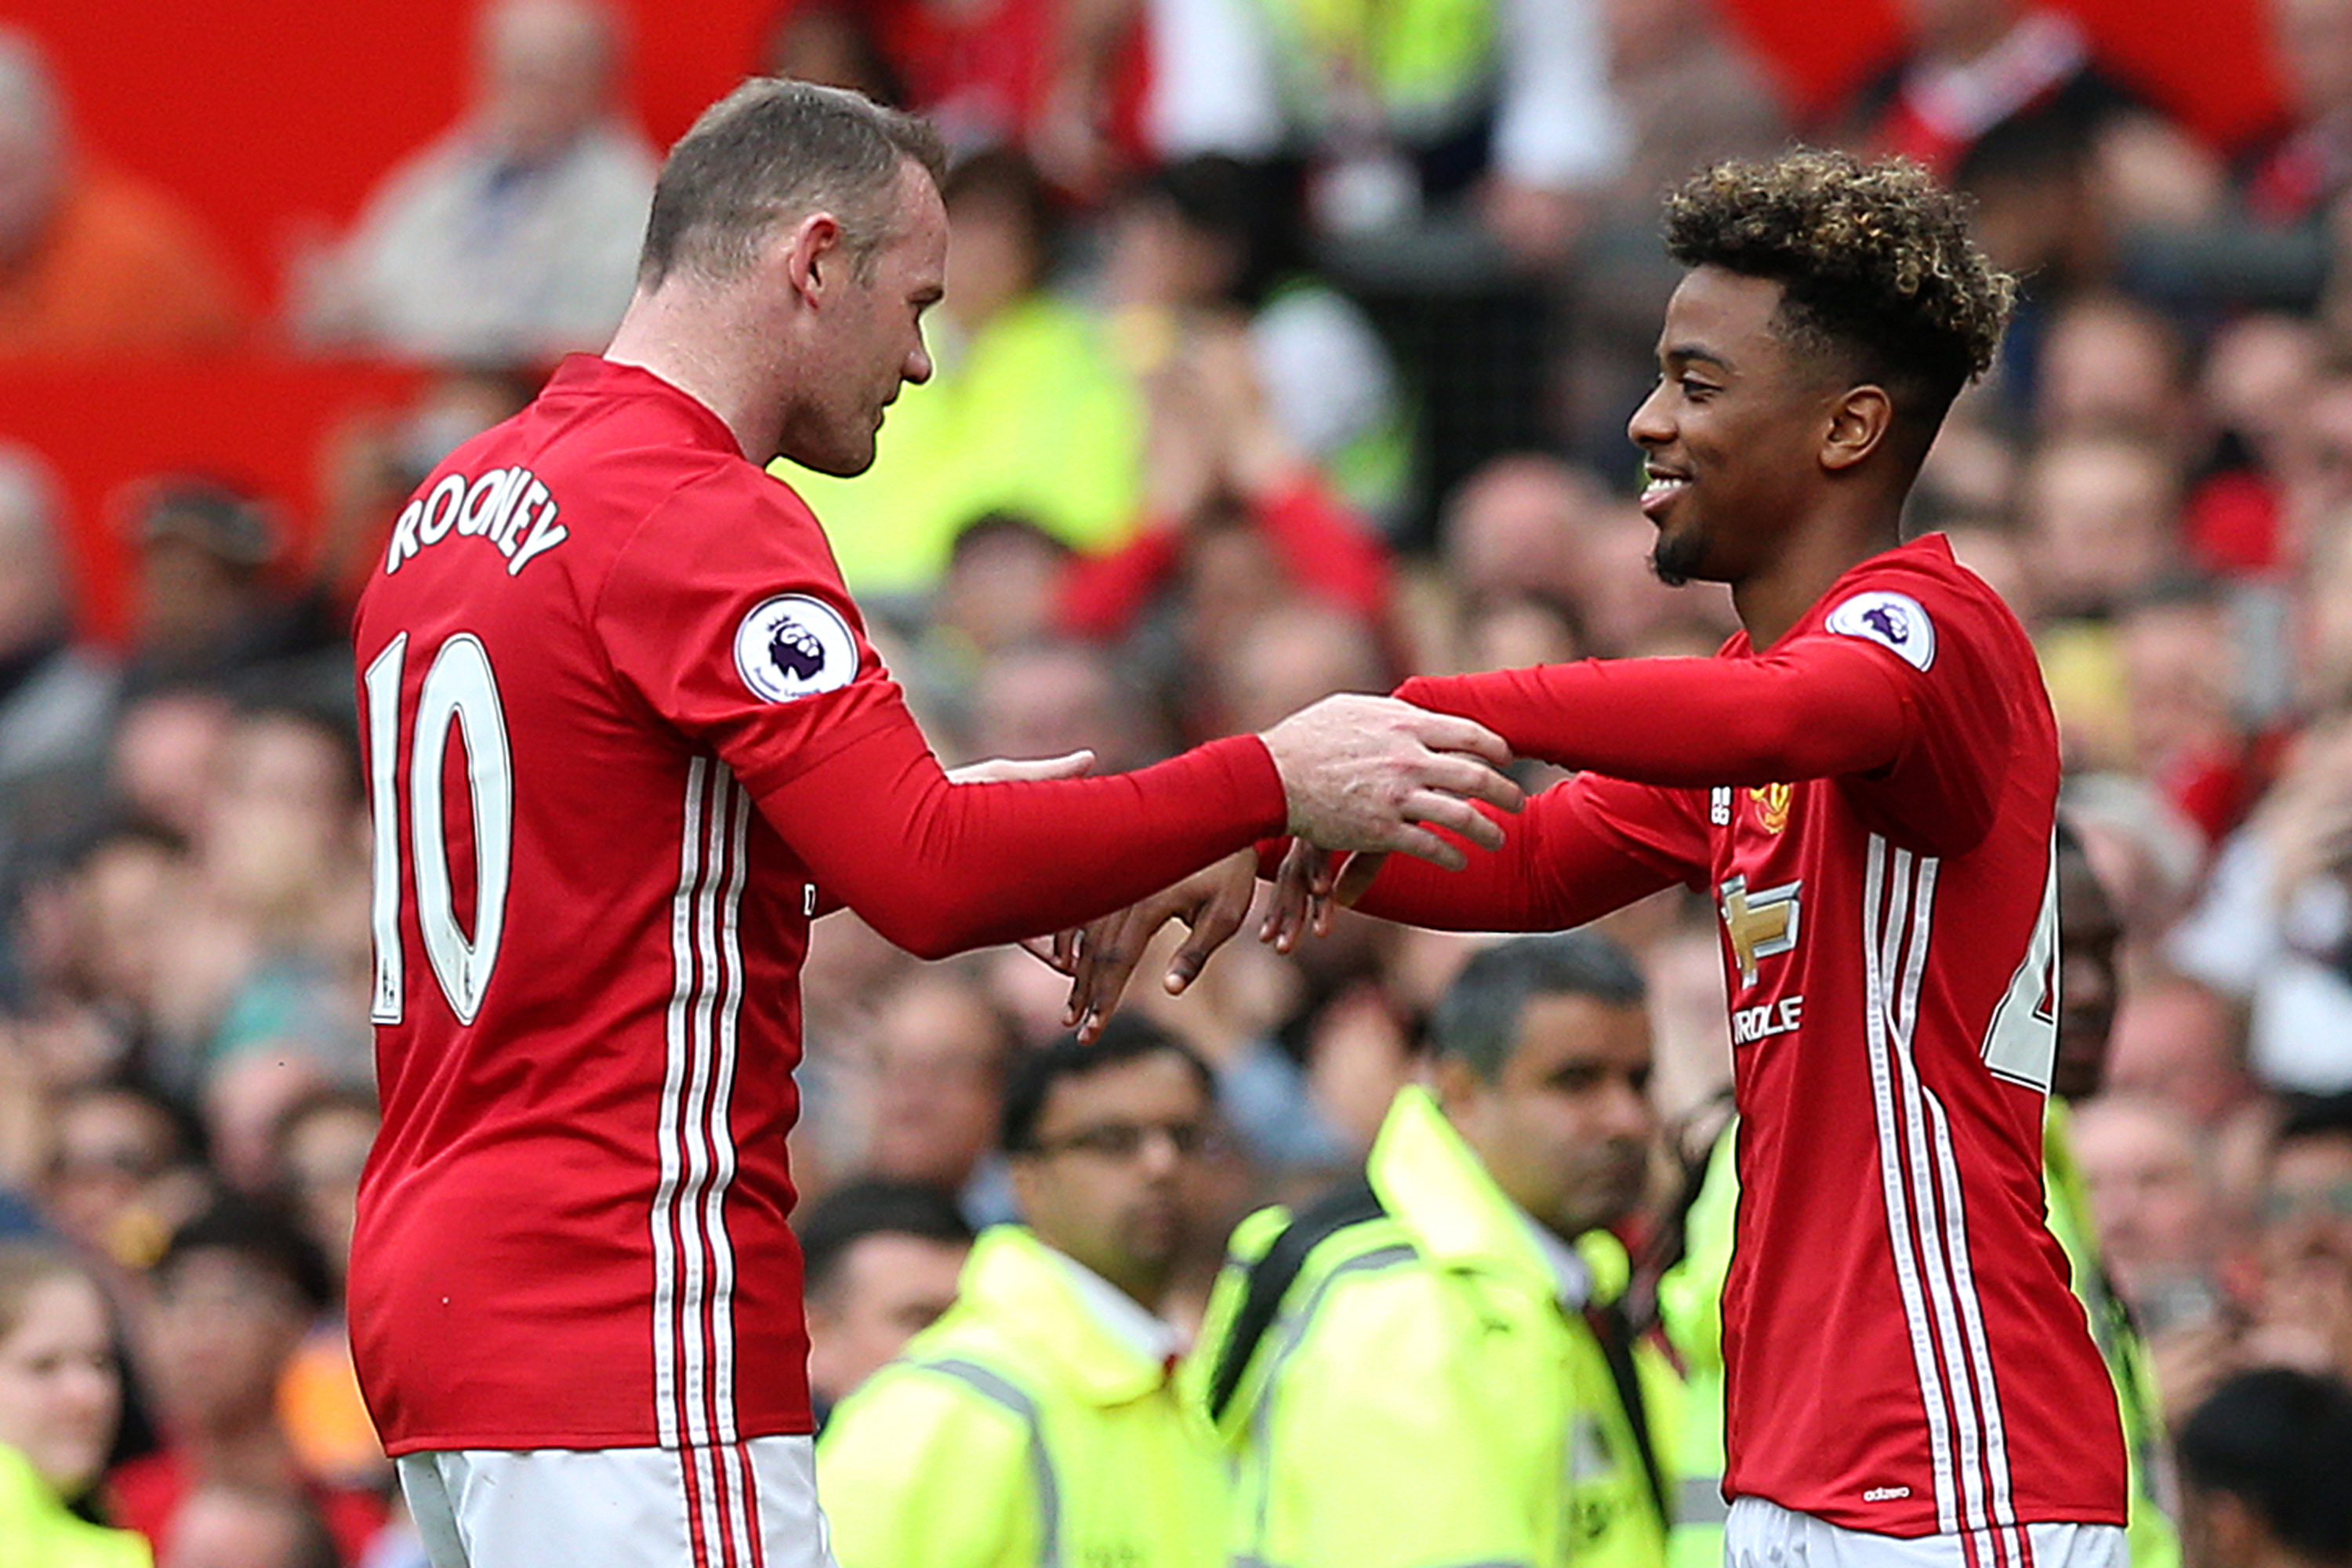 Manchester United's Angel Gomes is substituted on for Wayne Rooney